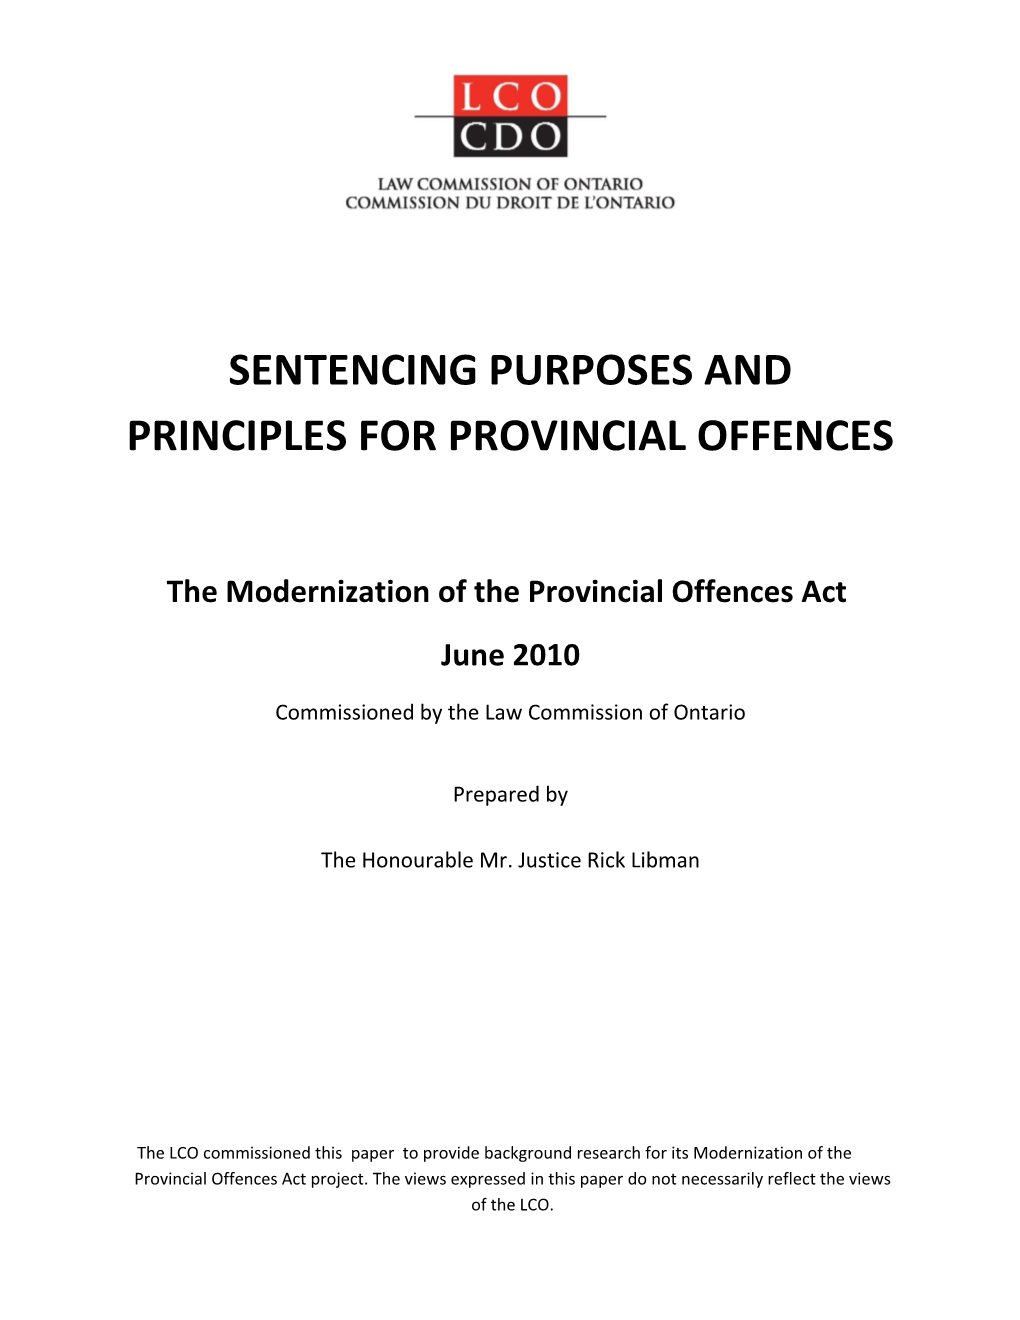 Sentencing Purposes and Principles for Provincial Offences